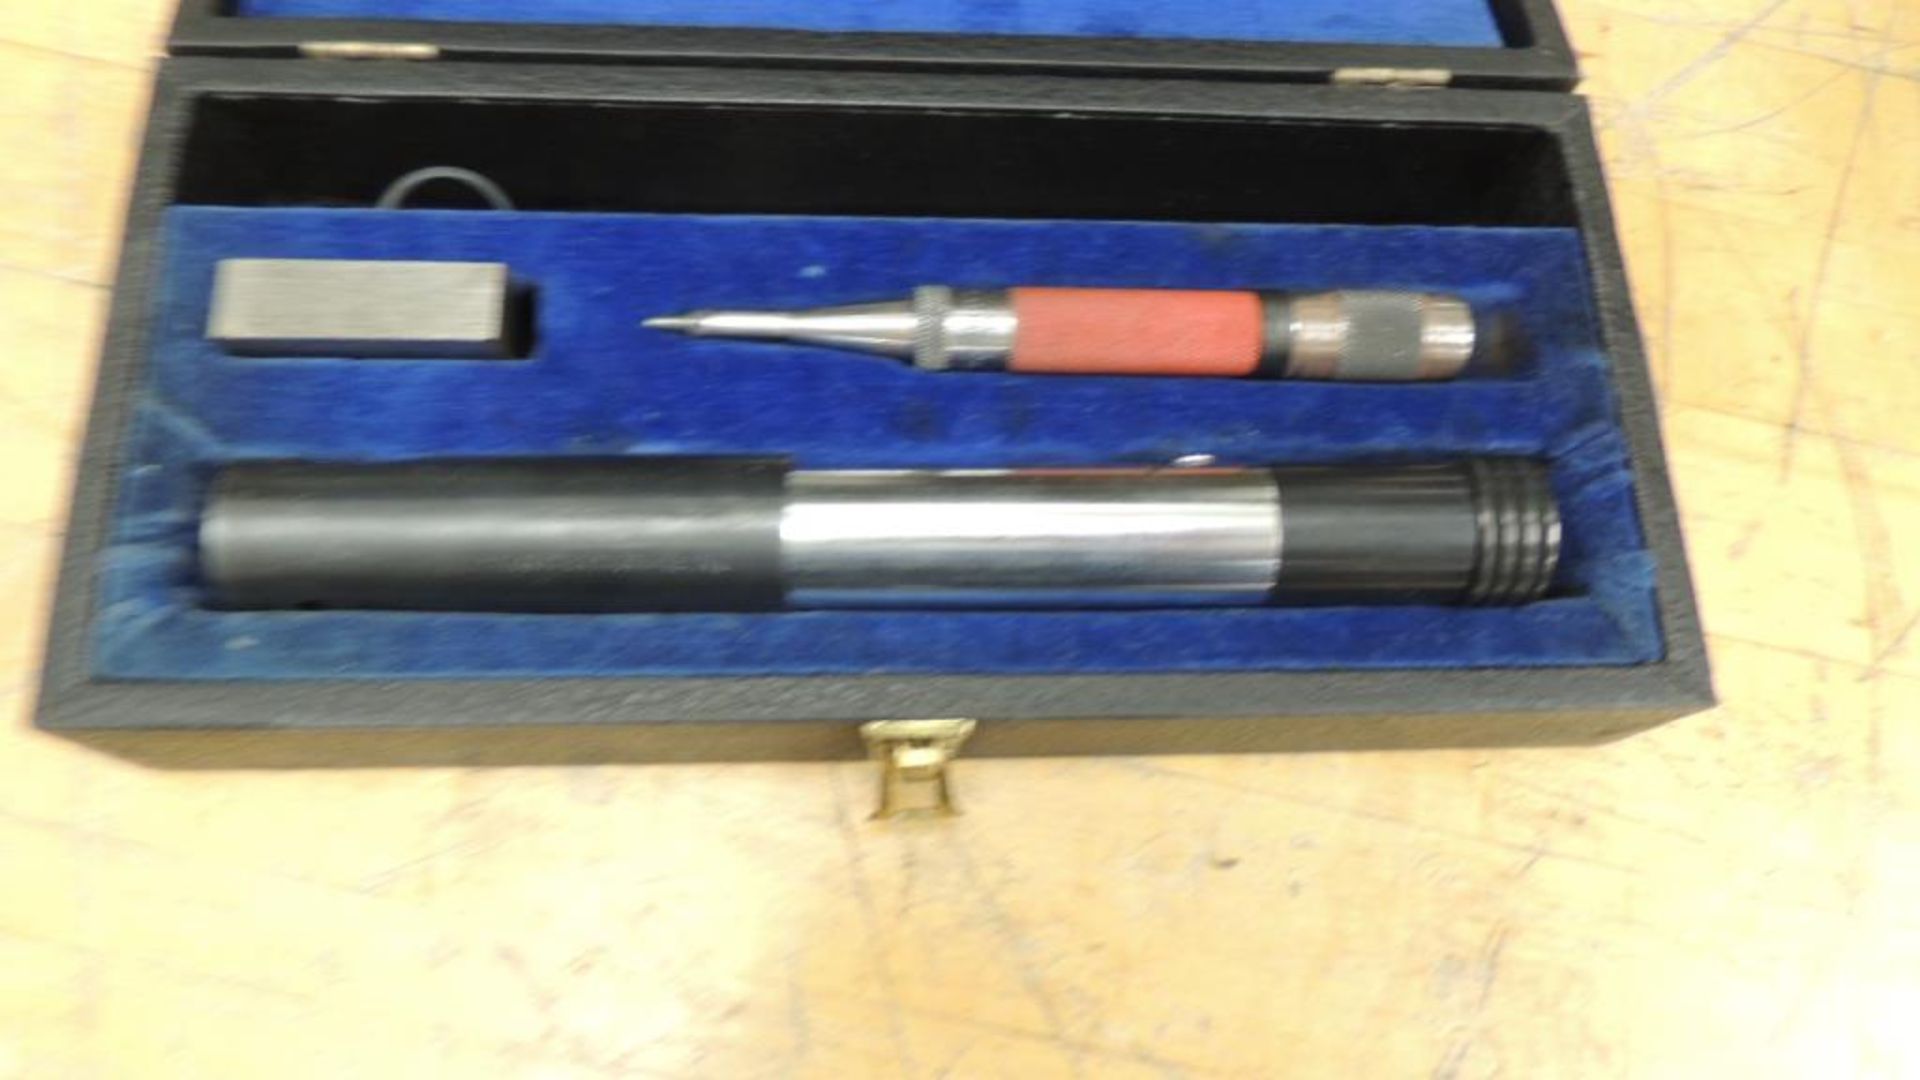 Pacific Transducer 316 Hardness tester; portable hardness tester. HIT# 2192794. Loc: 710. Asset - Image 2 of 3